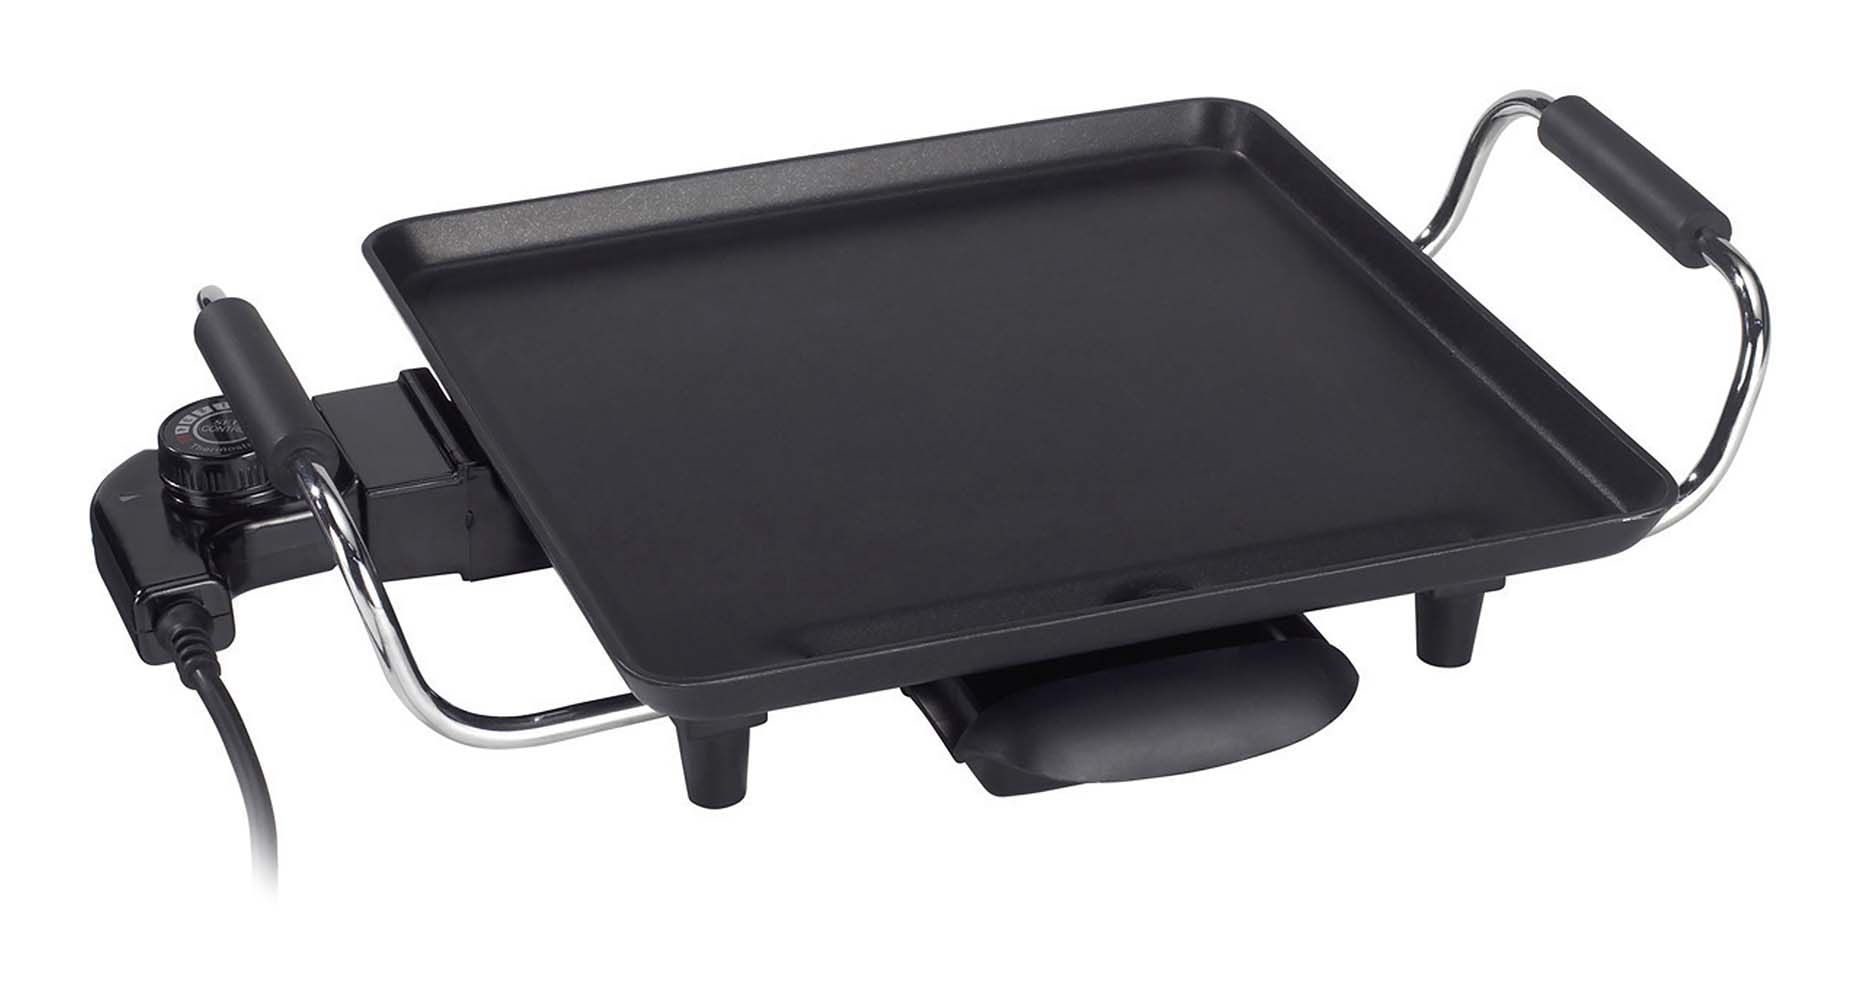 8500500 A compact baking tray. Extra compact and ideal to take on holiday. The Cooltouch handles make it easy to hold the tray. In addition, the temperature of the tray can be adjusted up to 250° C, it is equipped with a convenient grease tray and a removable thermostat. 230 V and 800 W